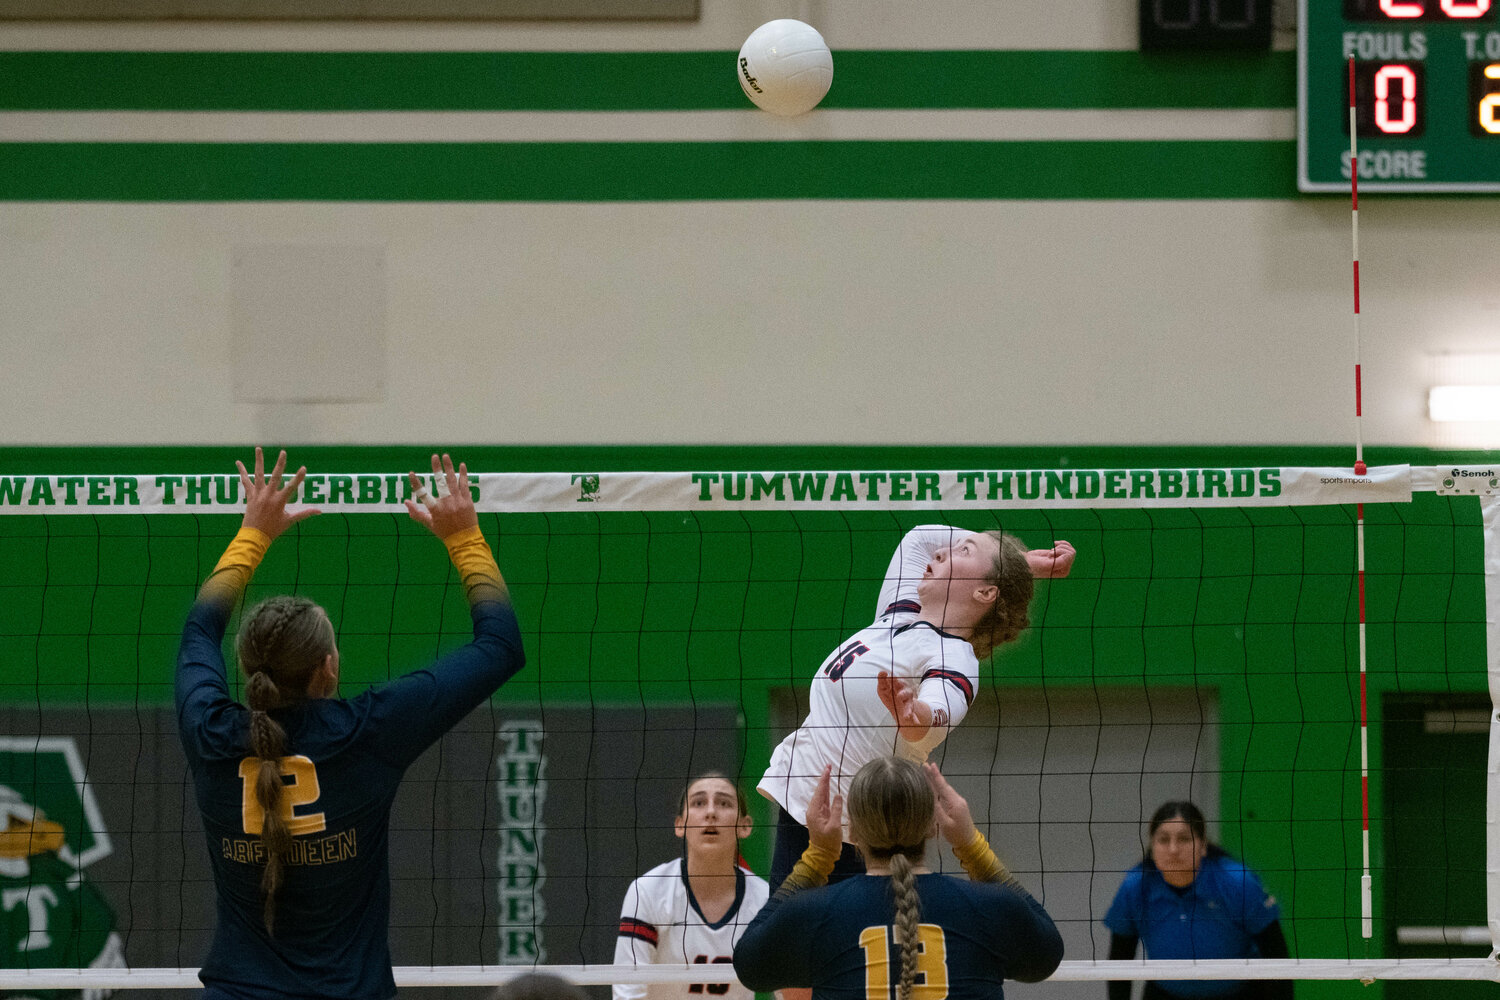 Ashley Harris winds up at the net for a spike during Black Hills' four-set win over Aberdeen in a winner-to-State match at the 2A District 4 Tournament, Nov. 4 at Tumwater.